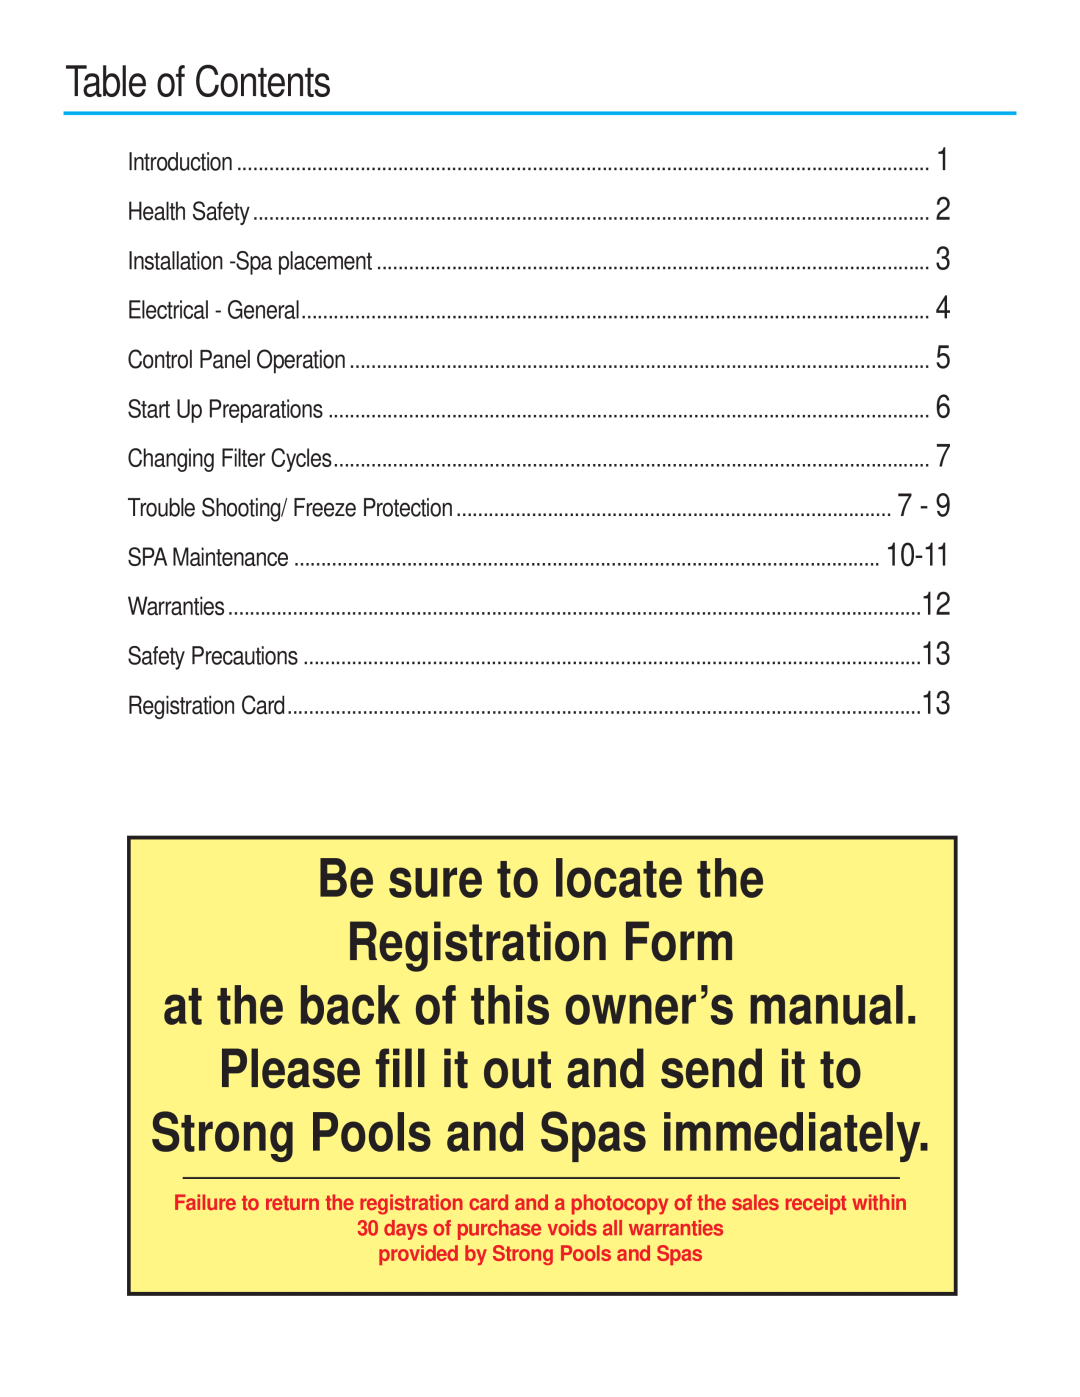 Strong Pools and Spas Barcelona owner manual Table of Contents, Be sure to locate the Registration Form 